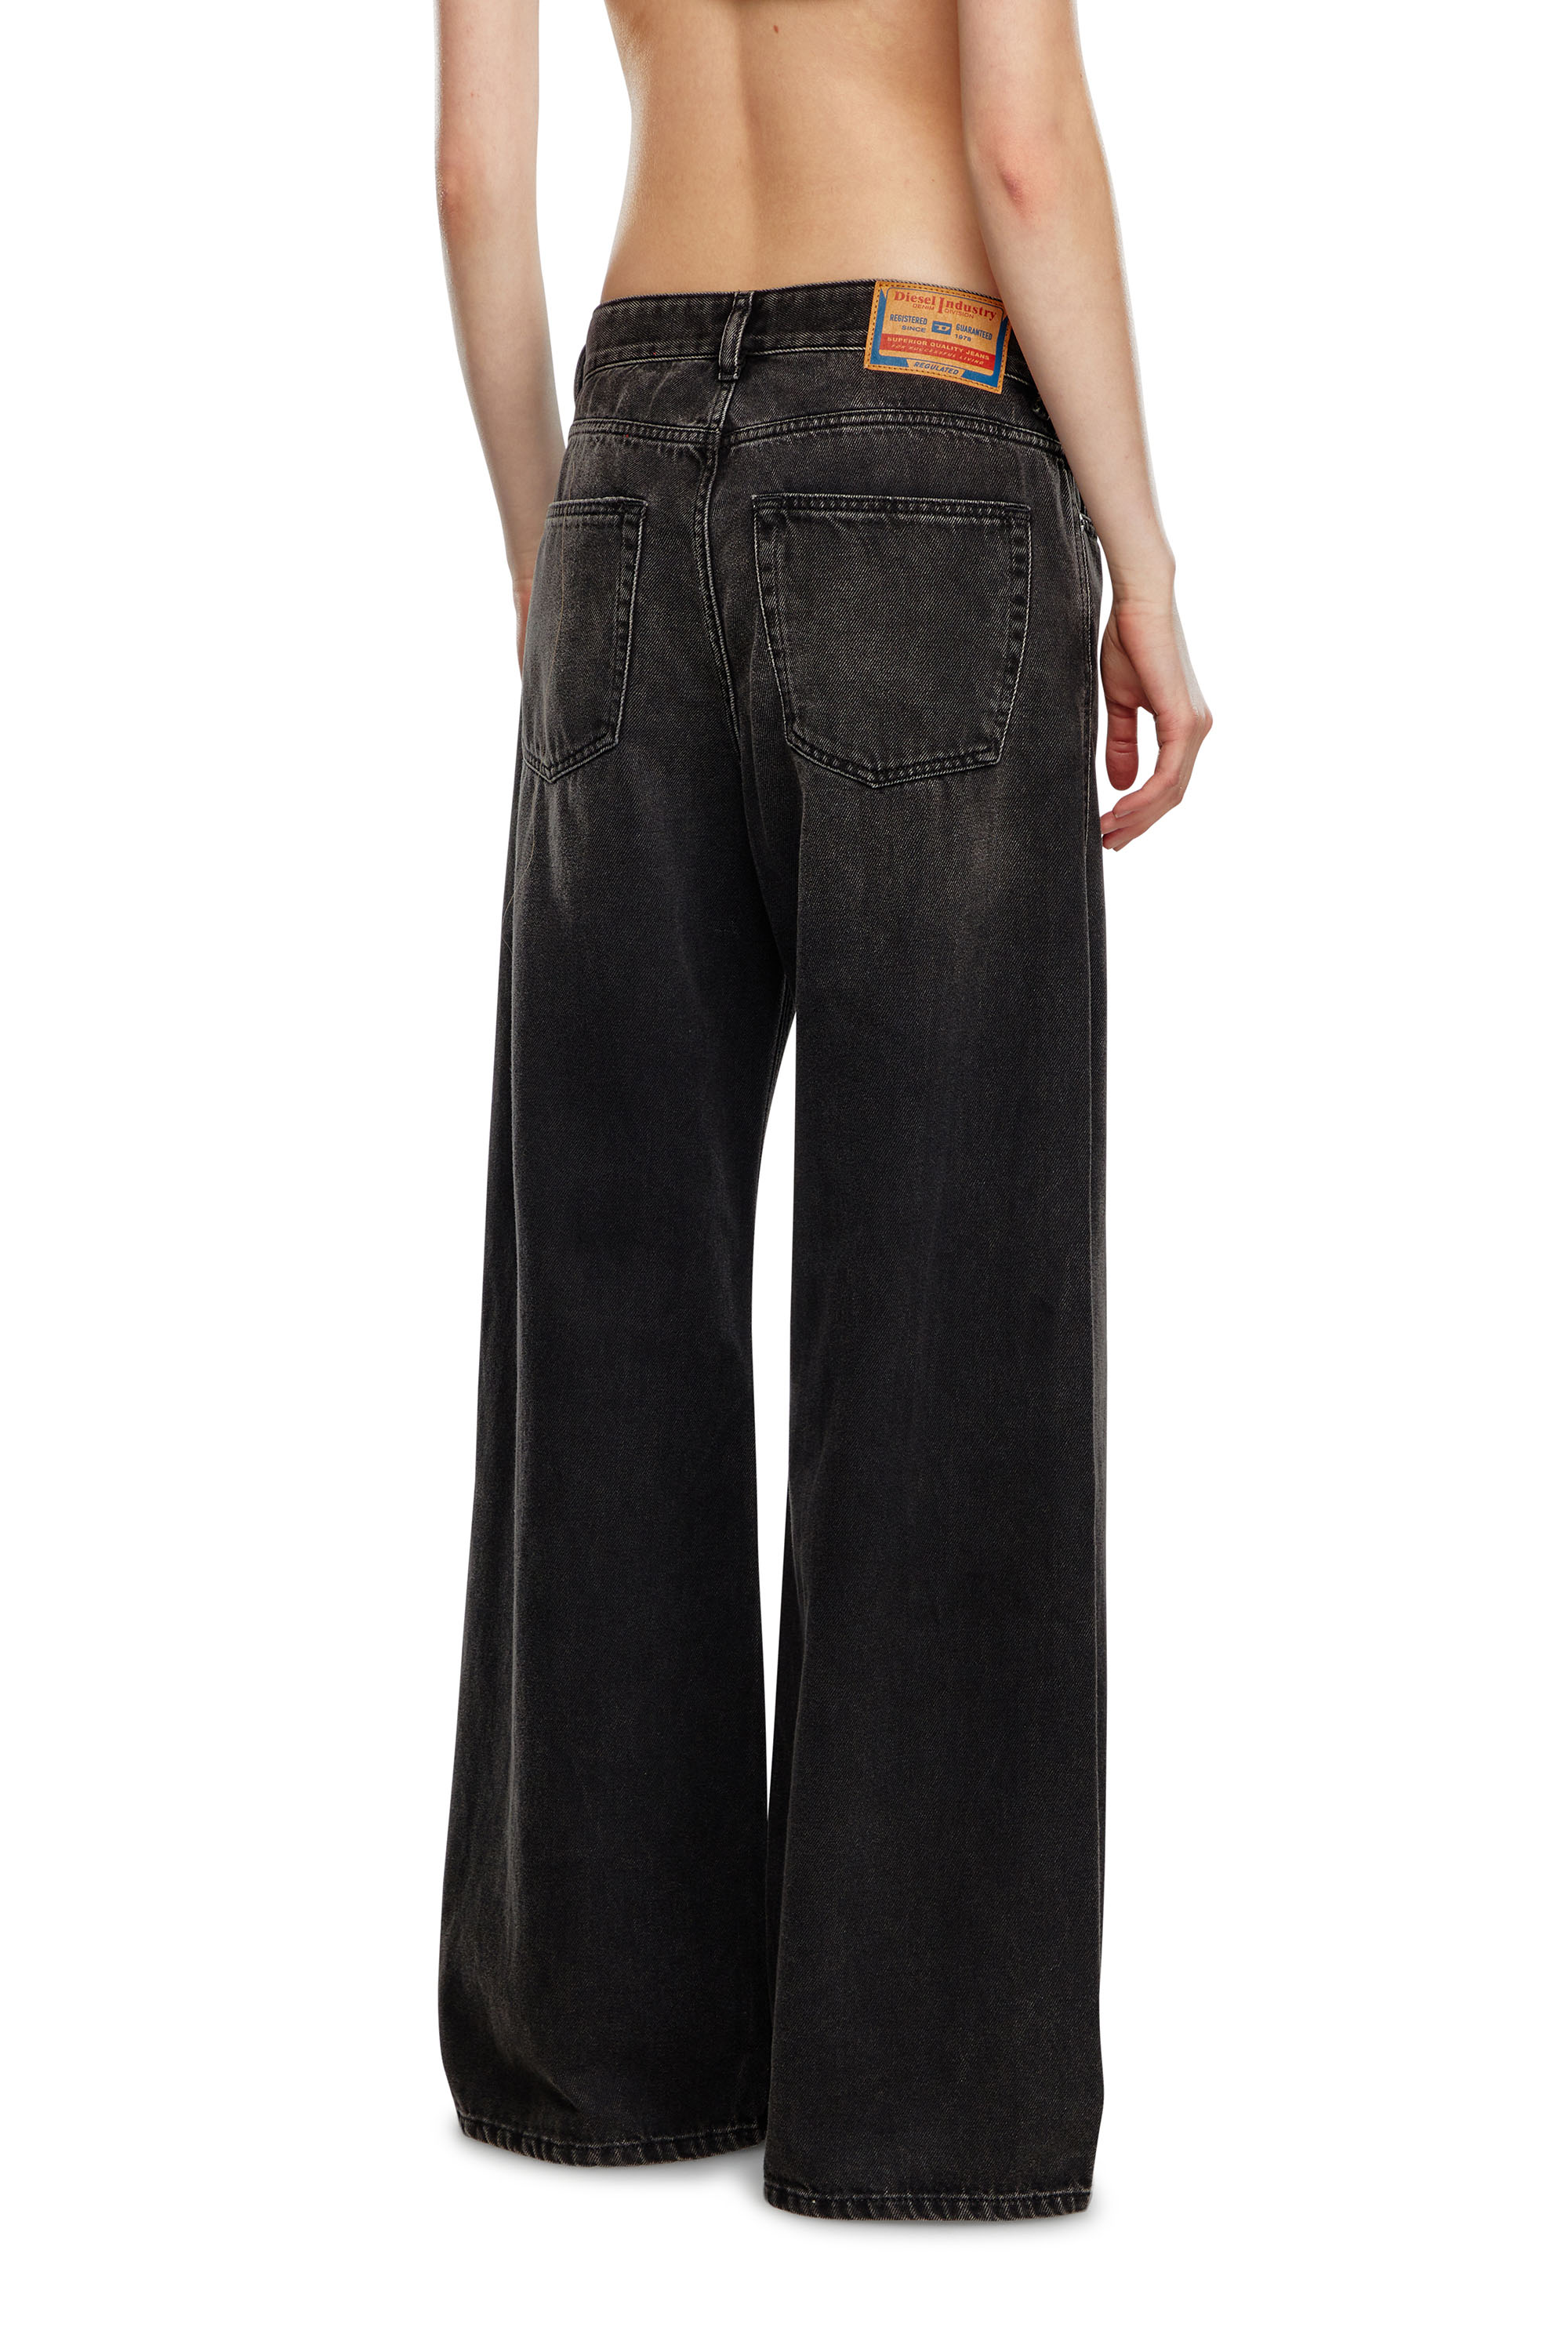 Diesel - Straight Jeans 1996 D-Sire 09J96, Mujer Straight Jeans - 1996 D-Sire in Negro - Image 3